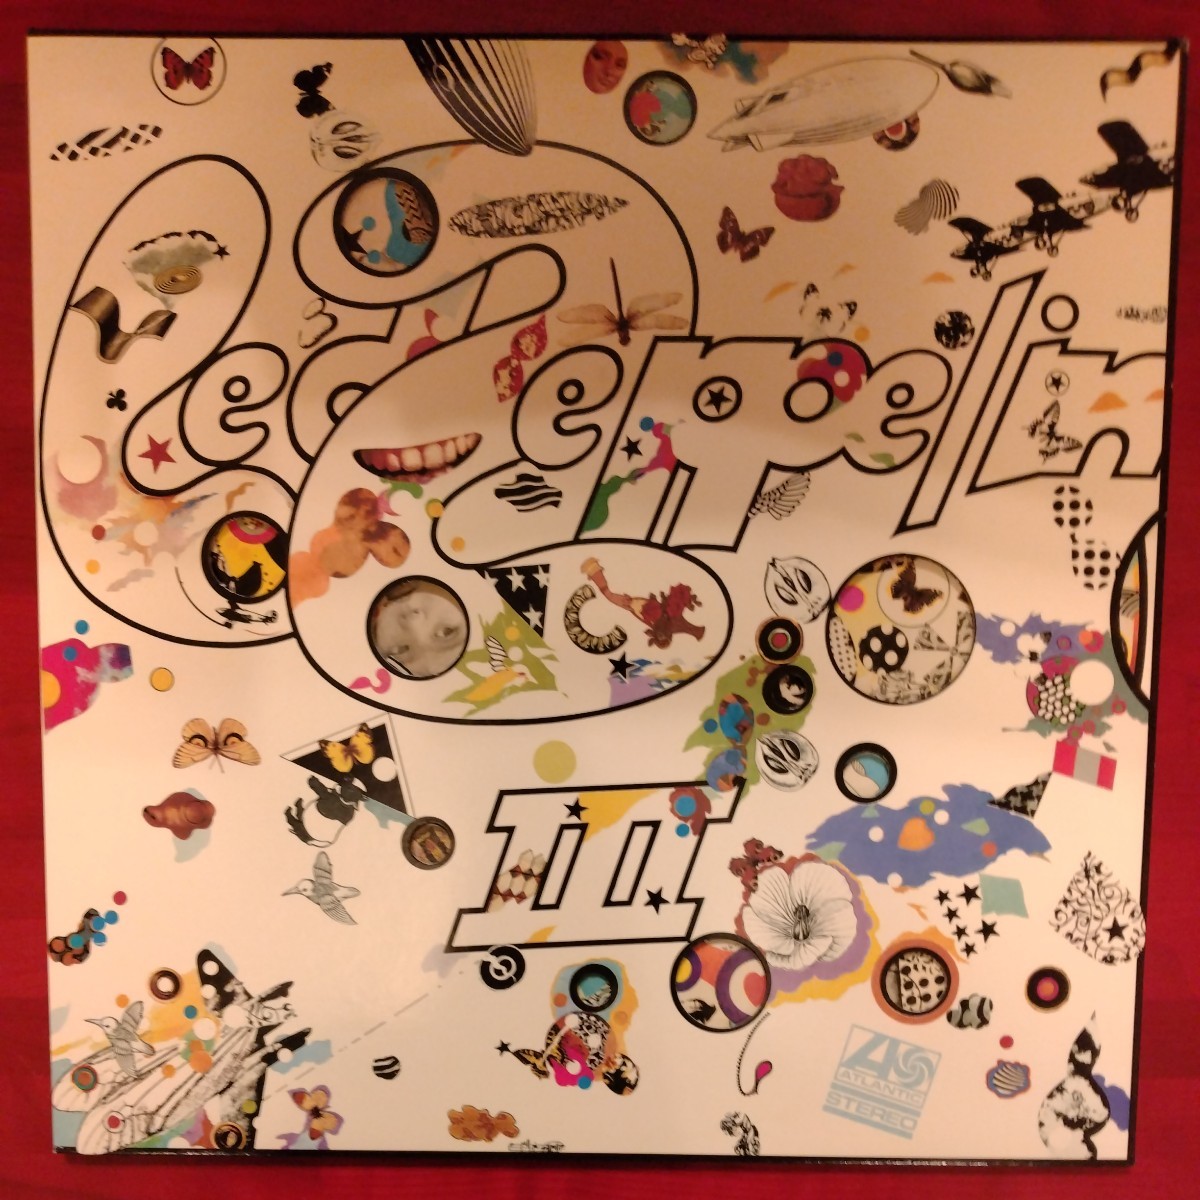 Led Zeppelin III　remastered by Jimmy Page 180g重量盤_画像1